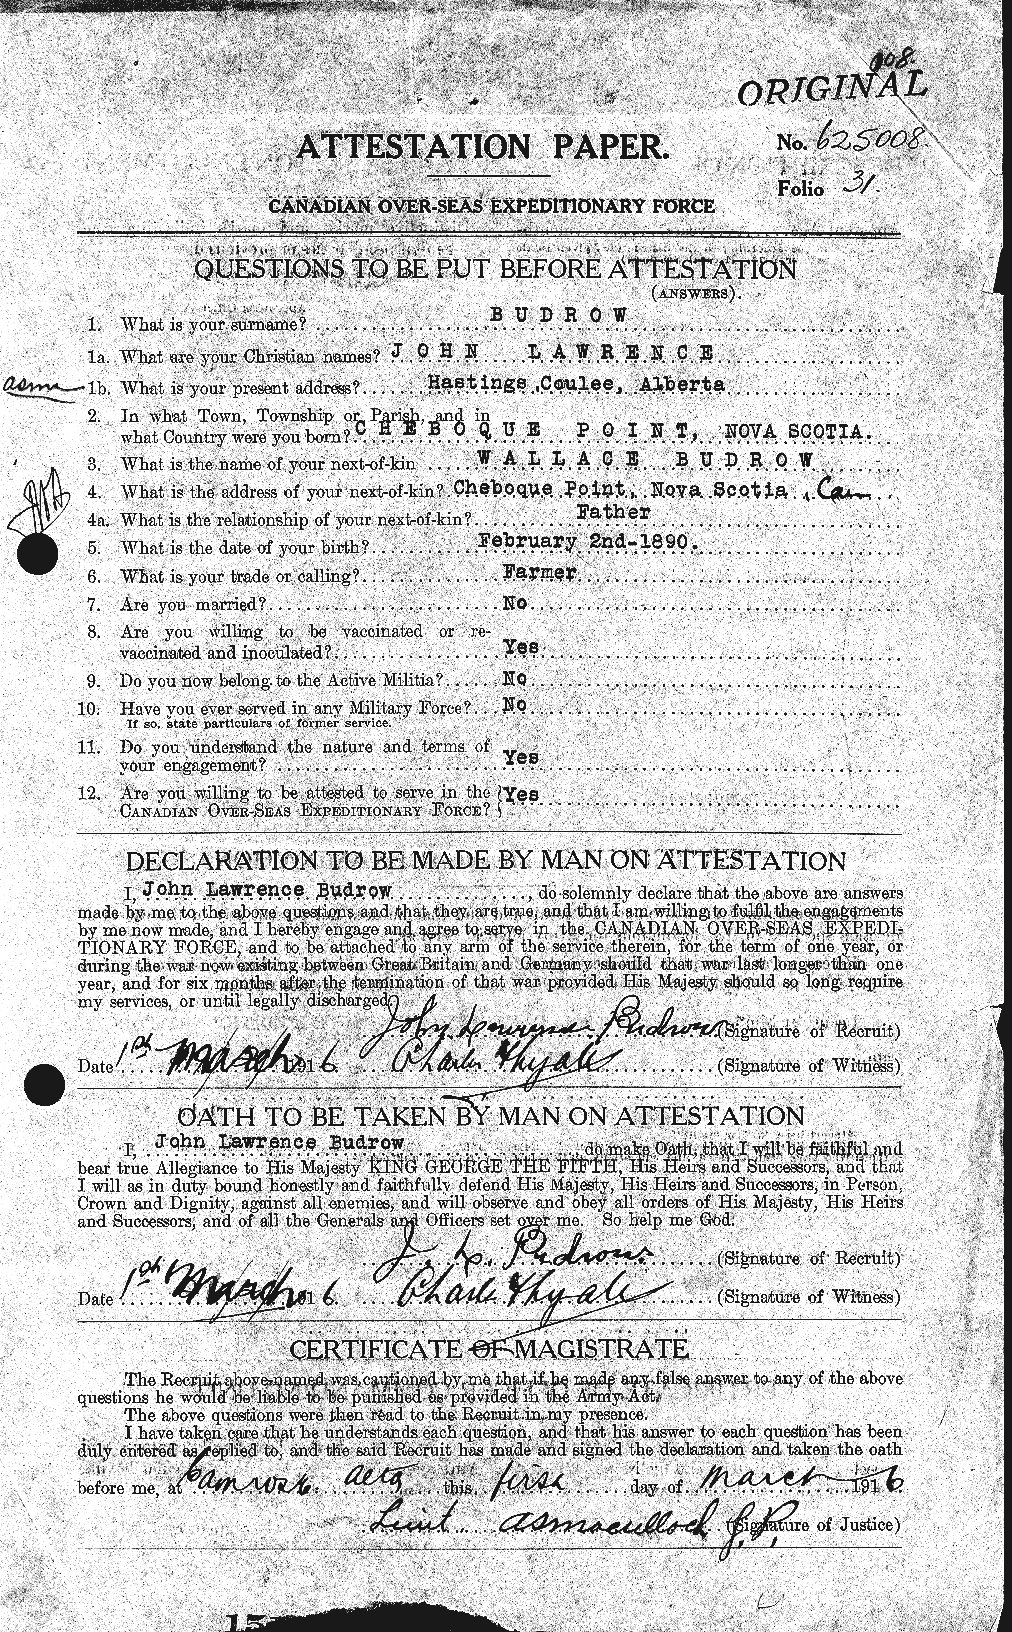 Personnel Records of the First World War - CEF 271394a